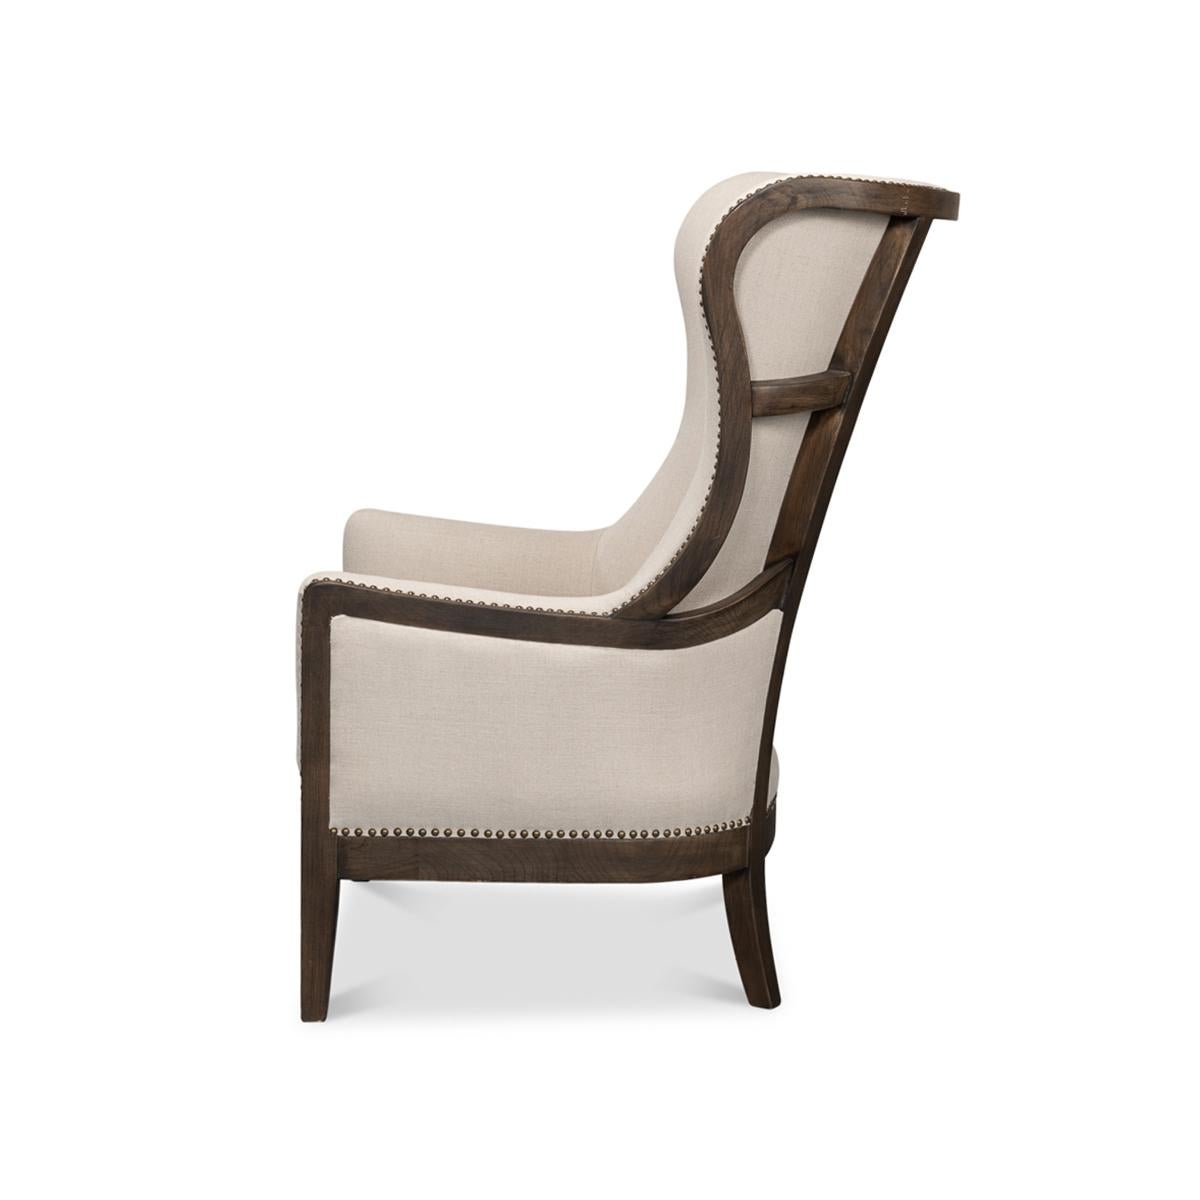 American Classical Updated Modern Classic Wingchair For Sale